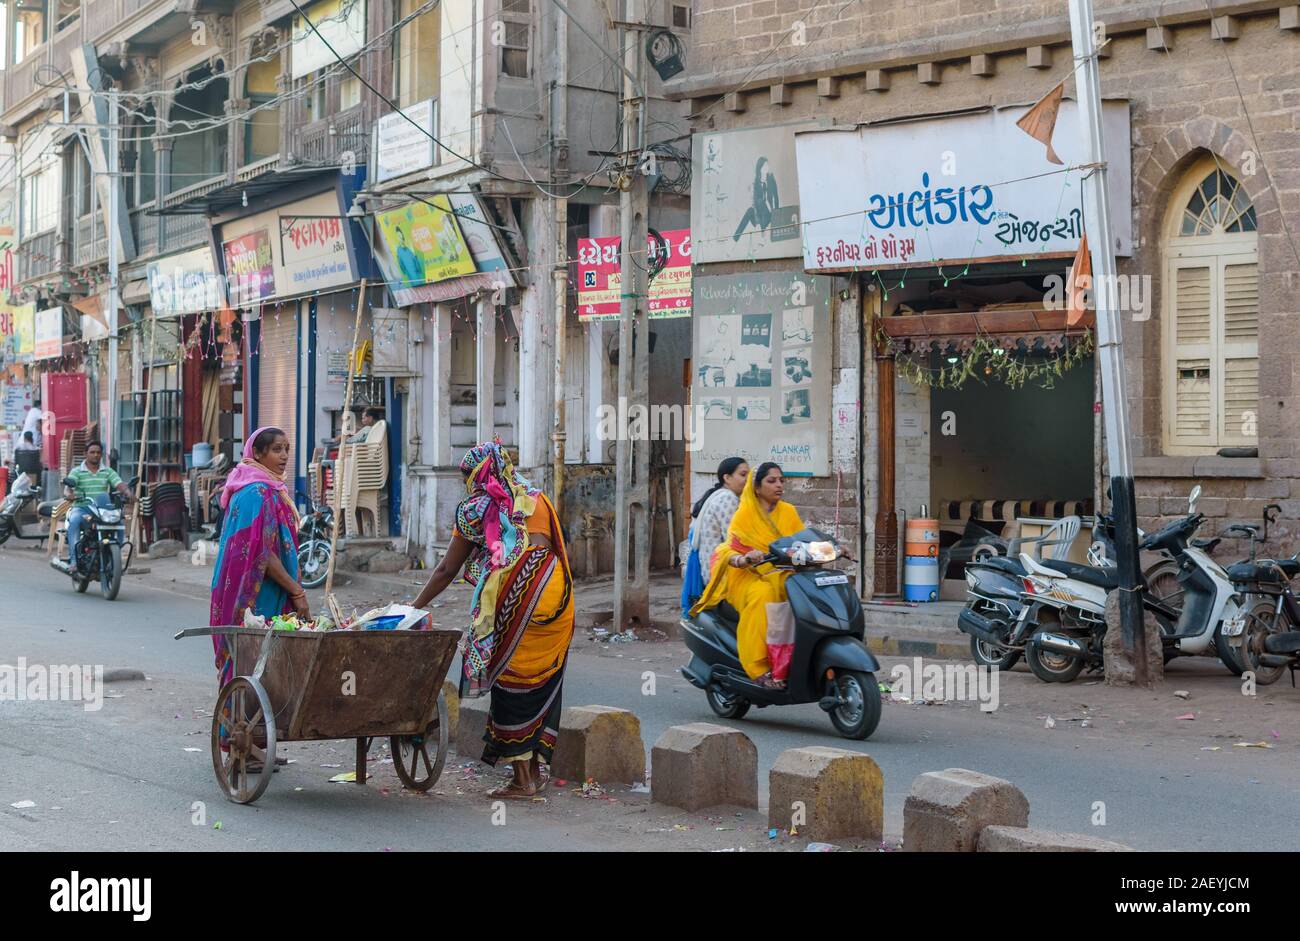 Two woman pick garbage off the streets in the middle of the traffic in the old town market. Gujarati text on signboards outside shops. Stock Photo